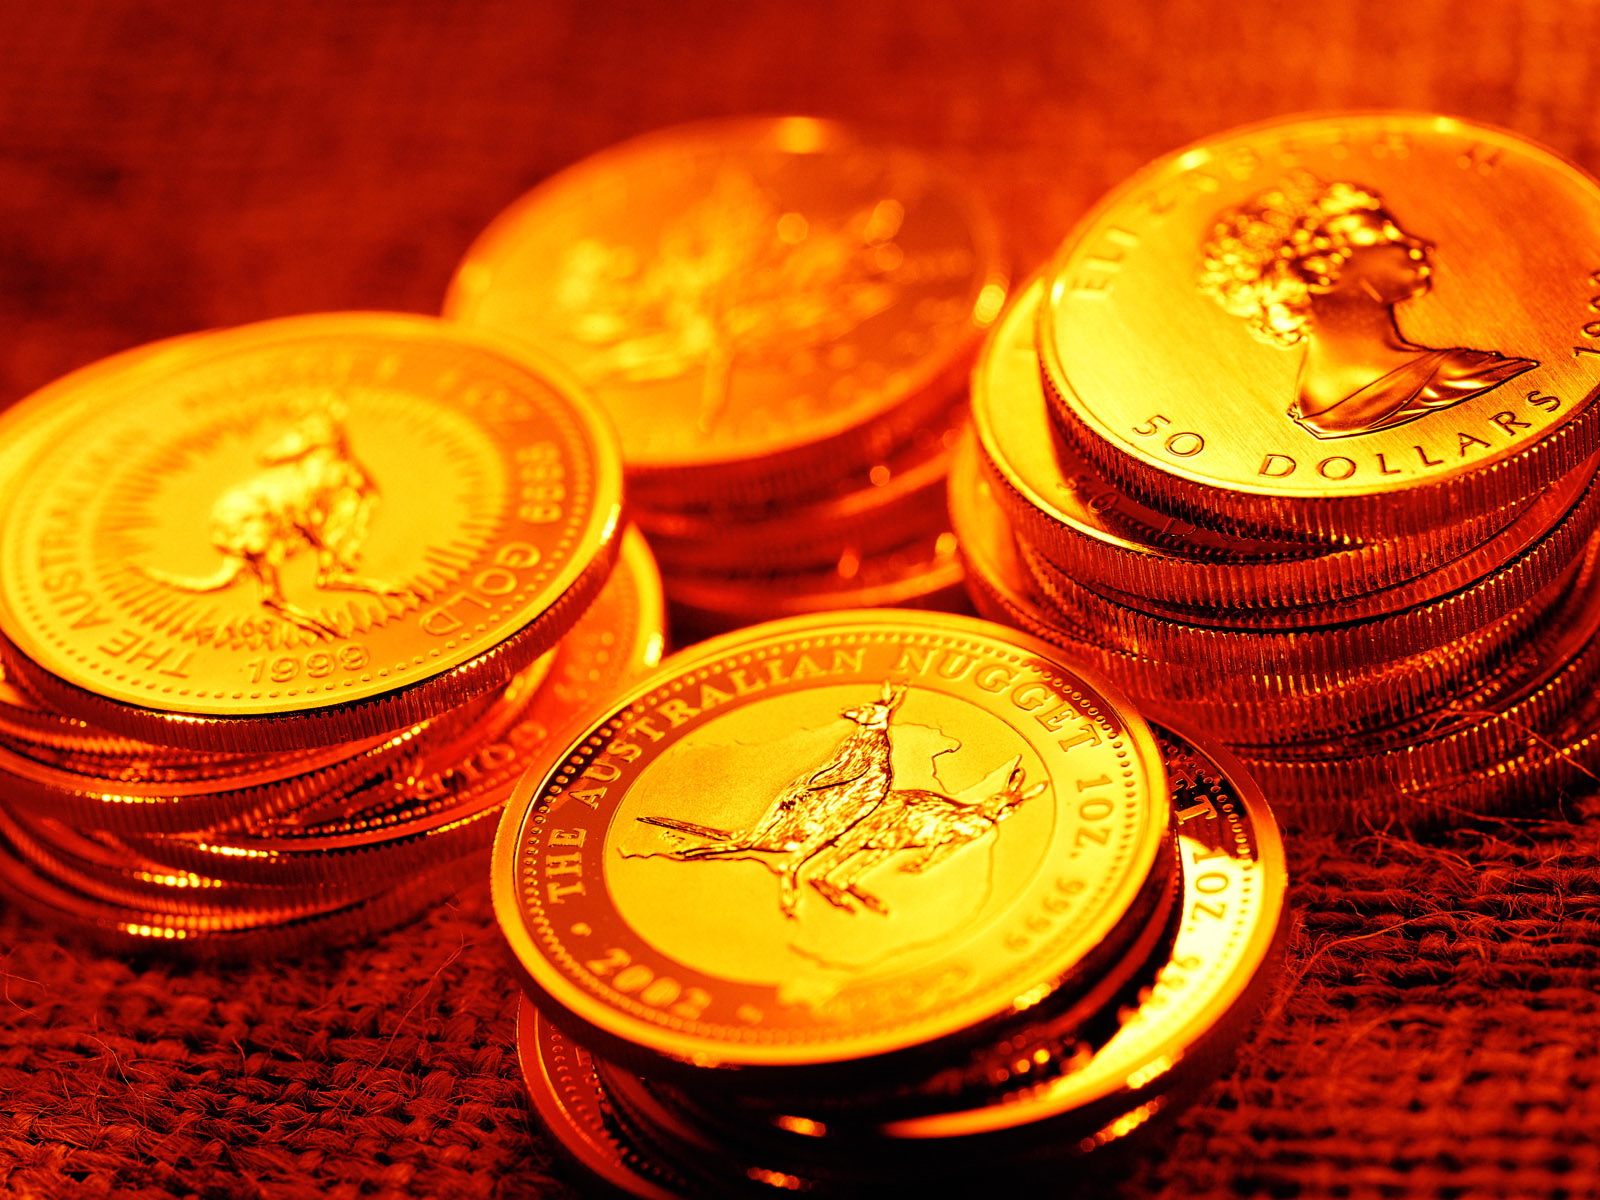 Australian Gold Coins Wallpaper And Image Pictures